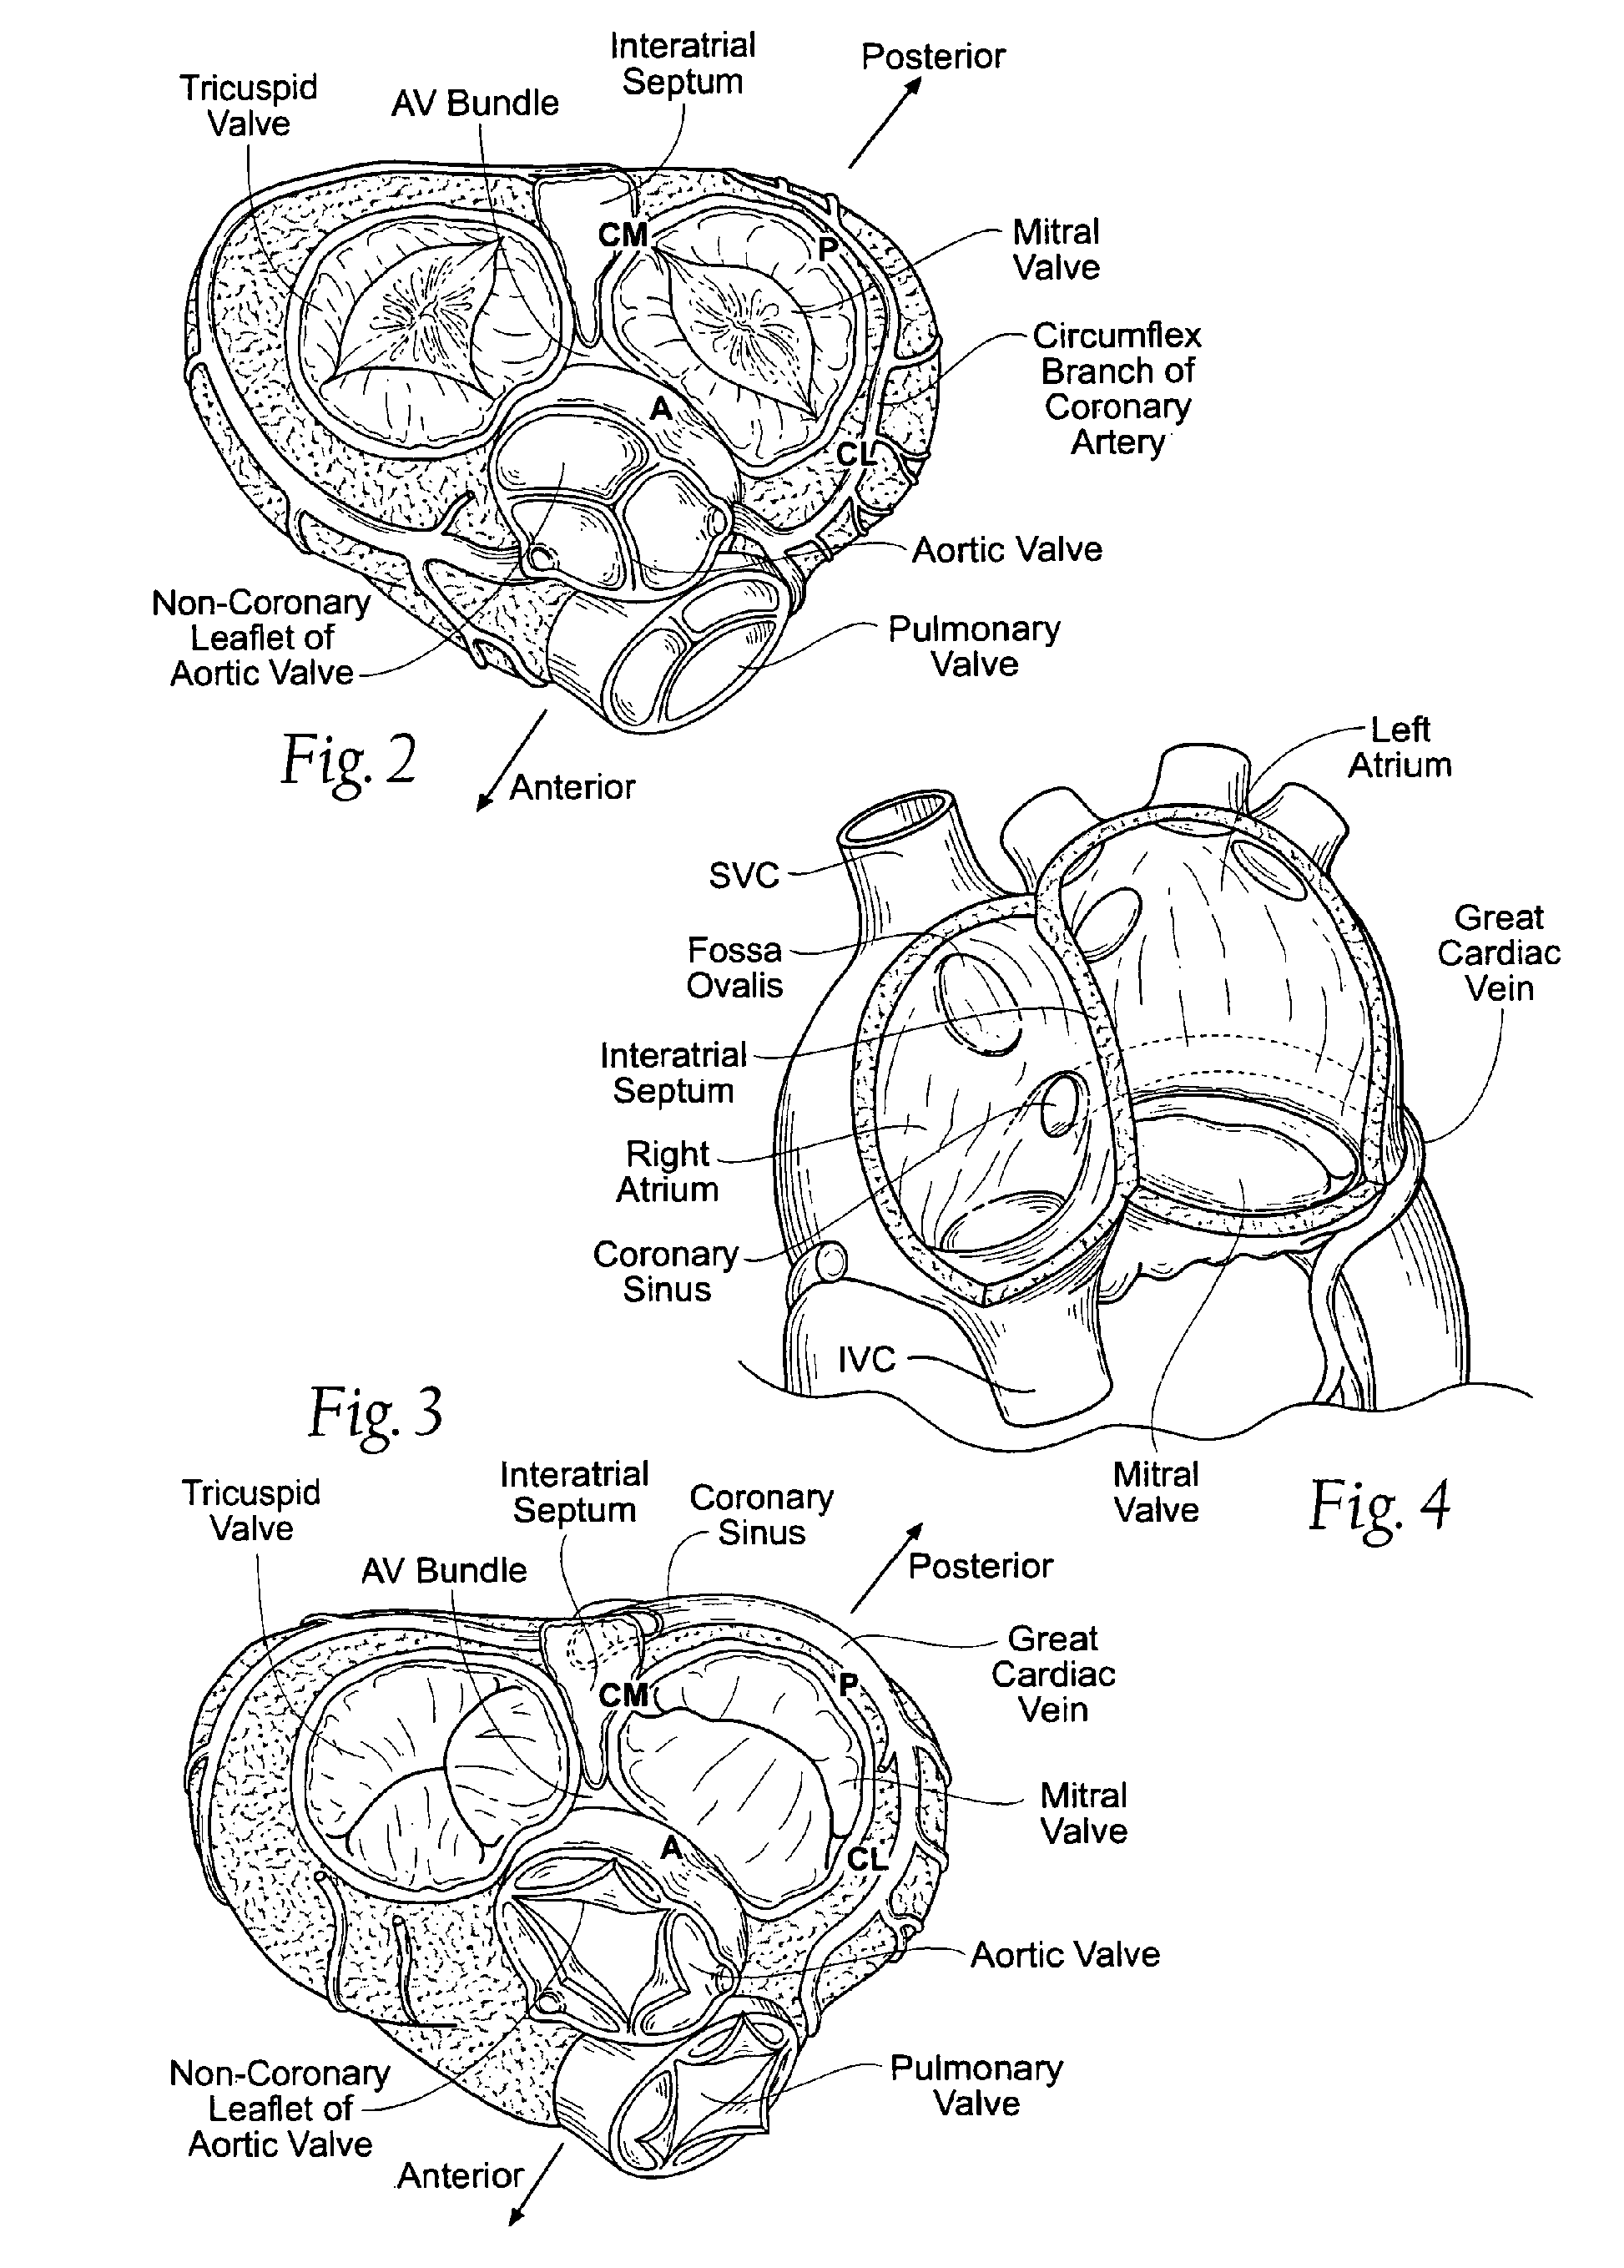 Quick-connect prosthetic heart valve and methods